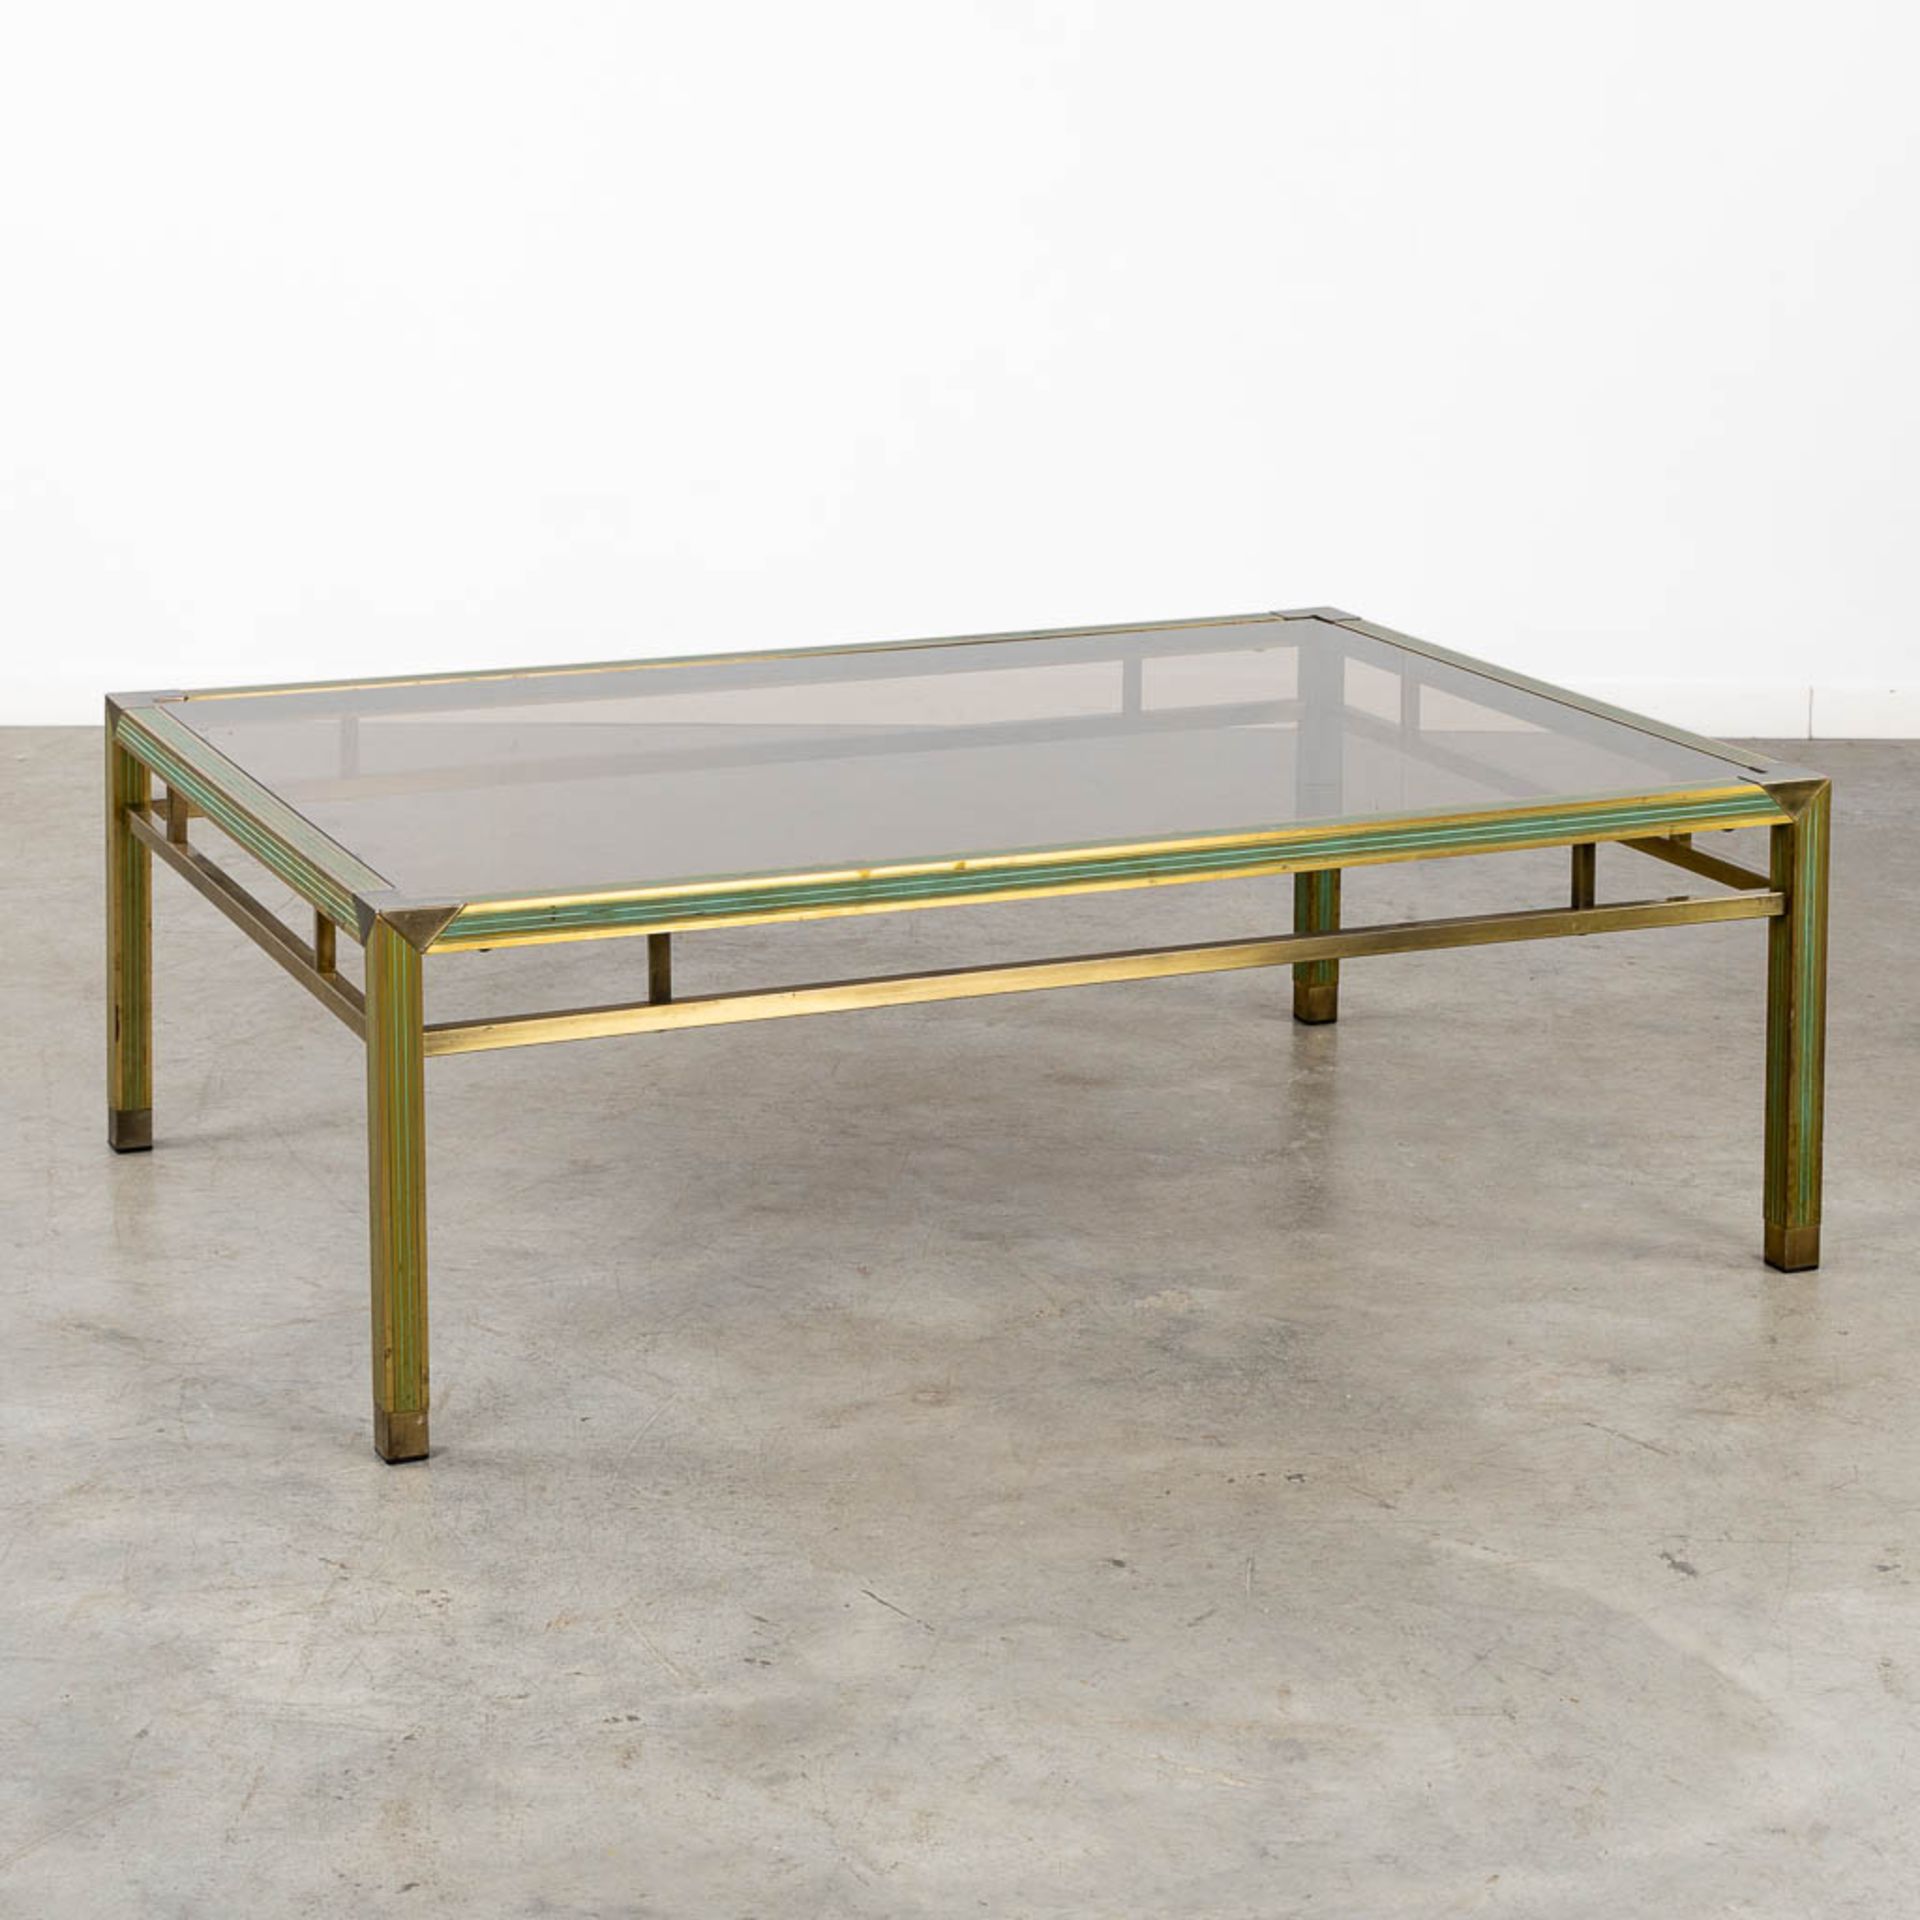 A mid-century coffee table, brass and glass in the style of Belgo Chrome. (L:88 x W:128 x H:43 cm)